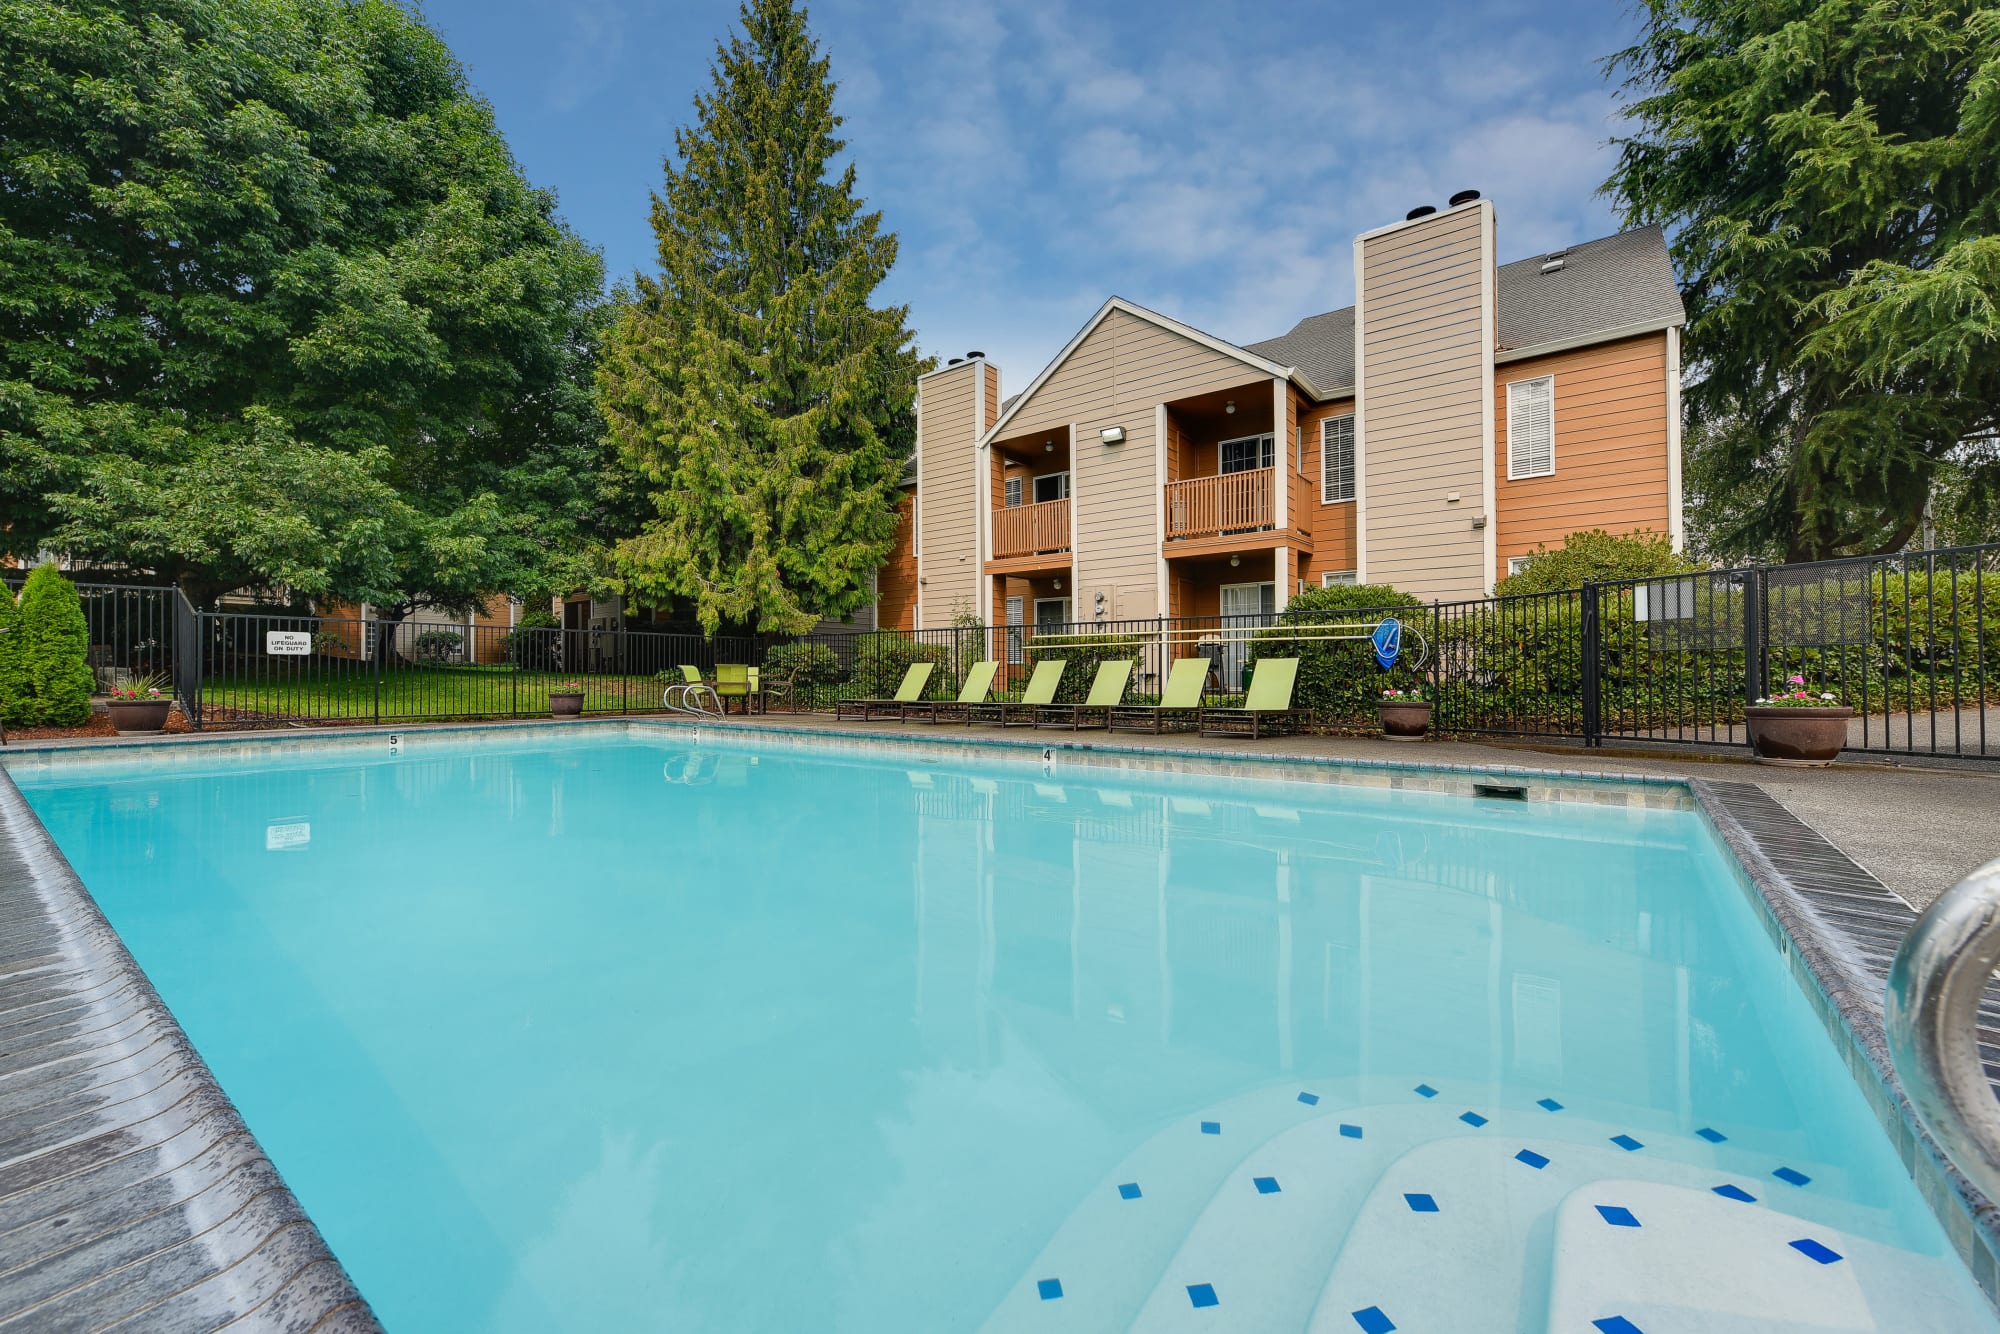 The bright blue pool at Carriage House Apartments in Vancouver, Washington